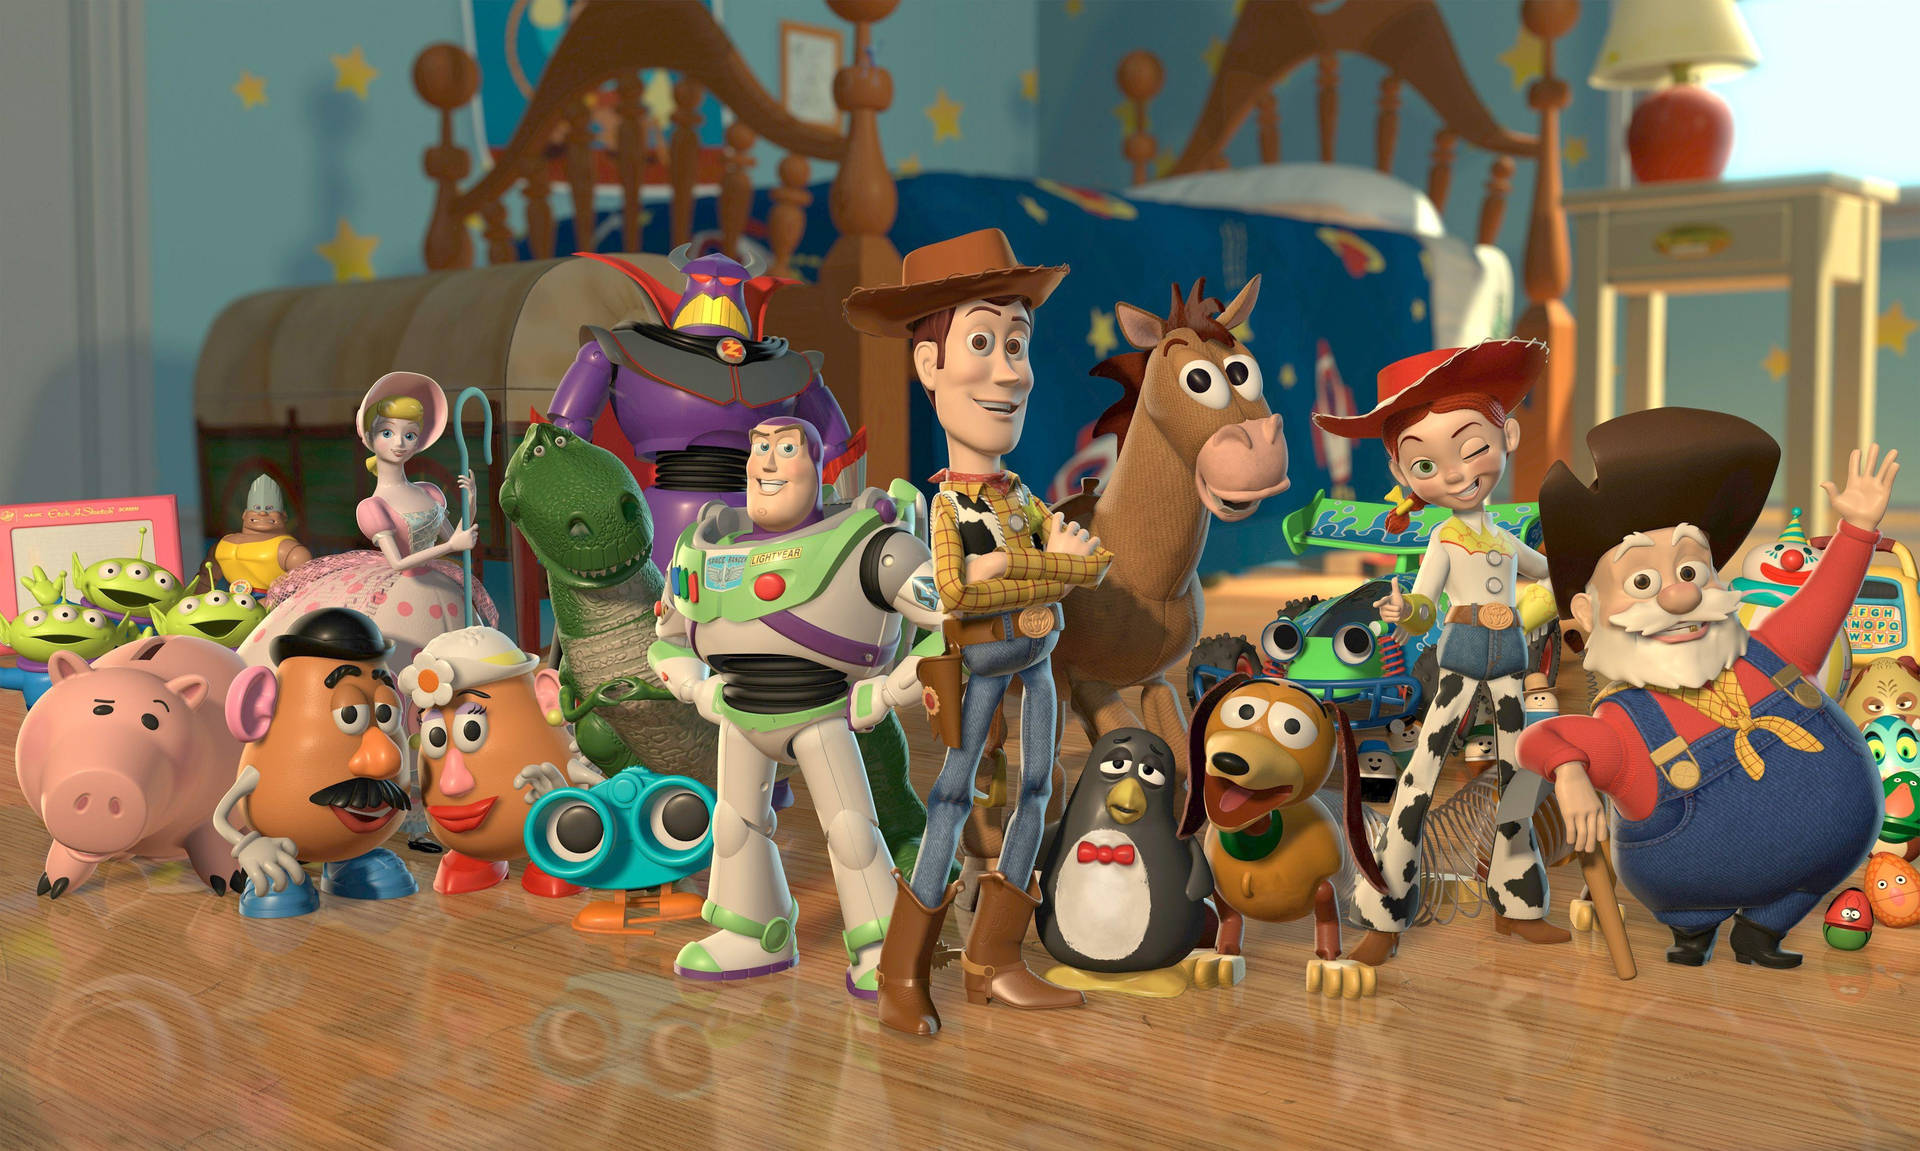 Free Toy Story Background Photos, [100+] Toy Story Background for FREE |  Wallpapers.com